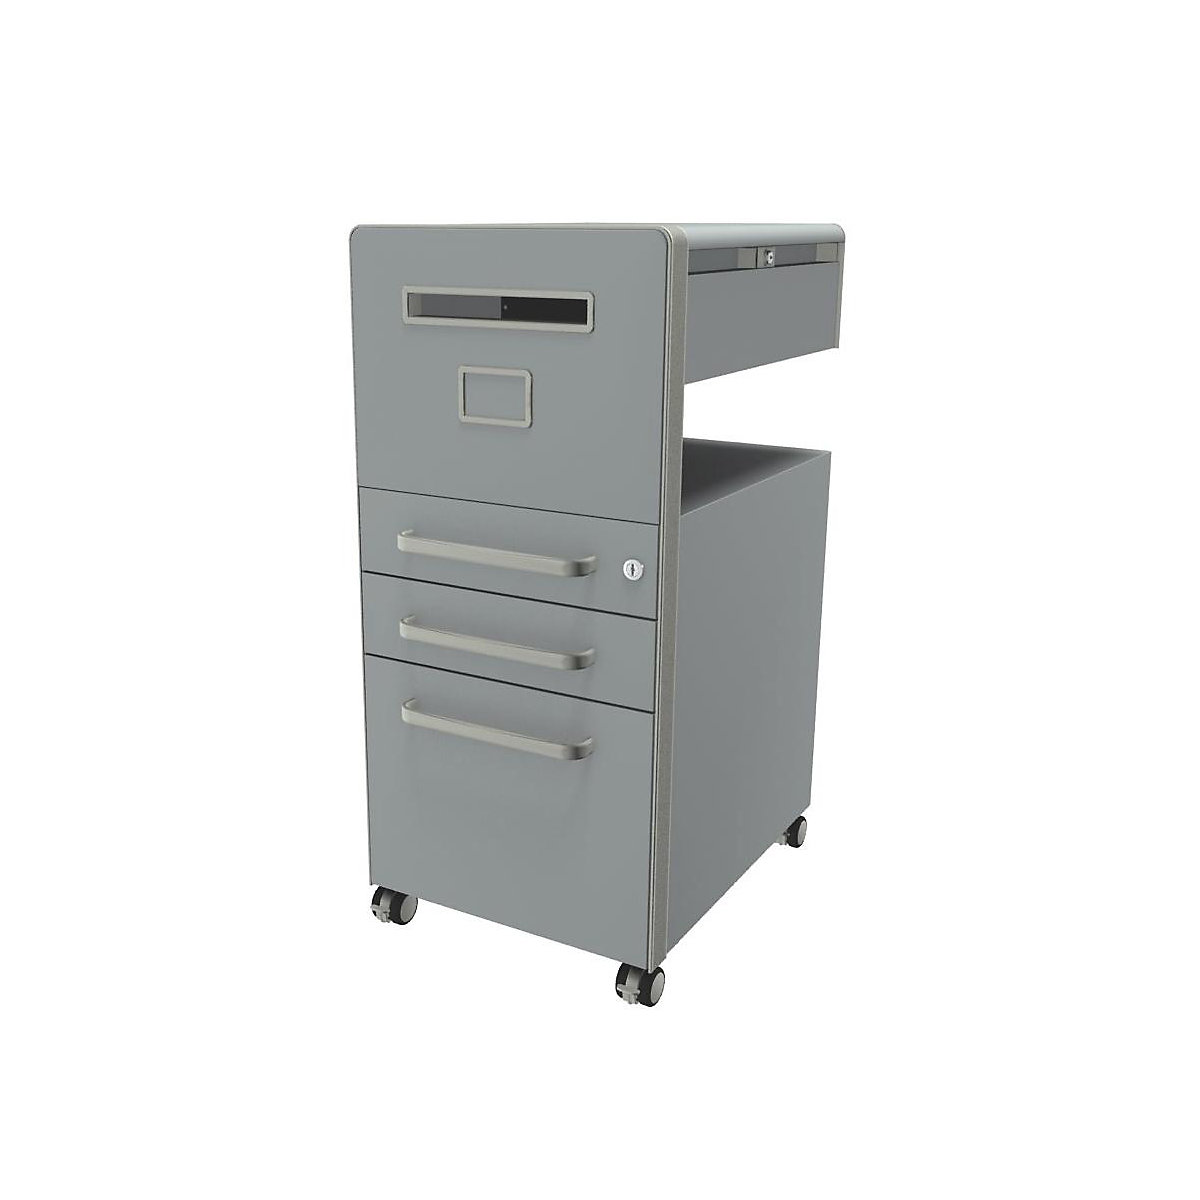 Bite™ pedestal furniture, with 1 whiteboard, opens on the left side – BISLEY, with 2 universal drawers, 1 suspension file drawer, silver, smooth paint finish-29